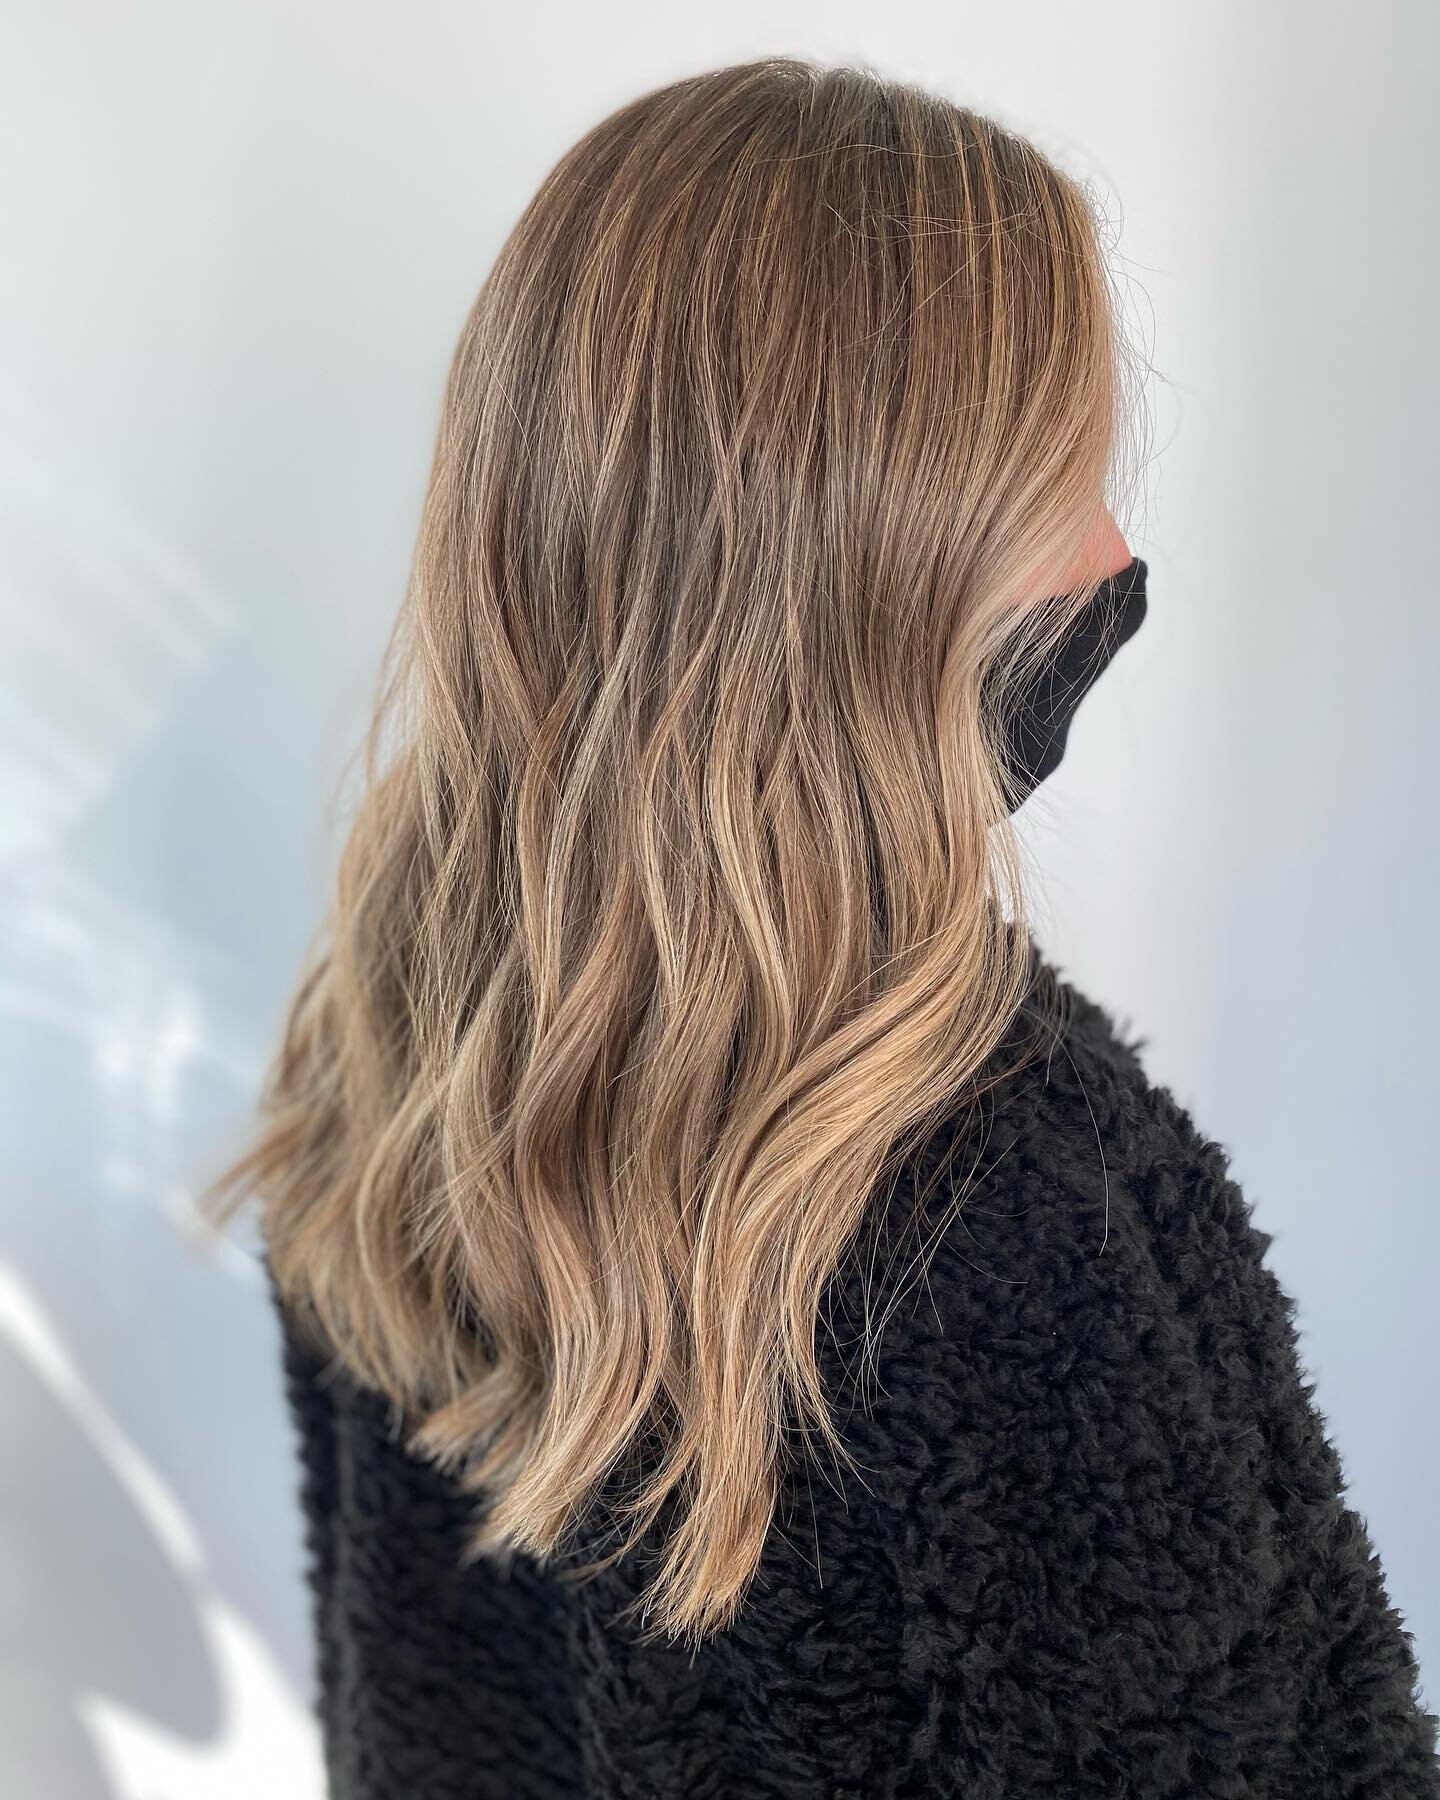 Lived in hair dreams!  Now booking for March appointments! Link in bio or DM for consultation &bull;
&bull;
&bull;
&bull;
&bull;
&bull;
&bull;
&bull;
#hairbymackenziejacobs #hermosabeach #sunkissedhairstudio #hermosabeachhair #manhattanbeach #redondo